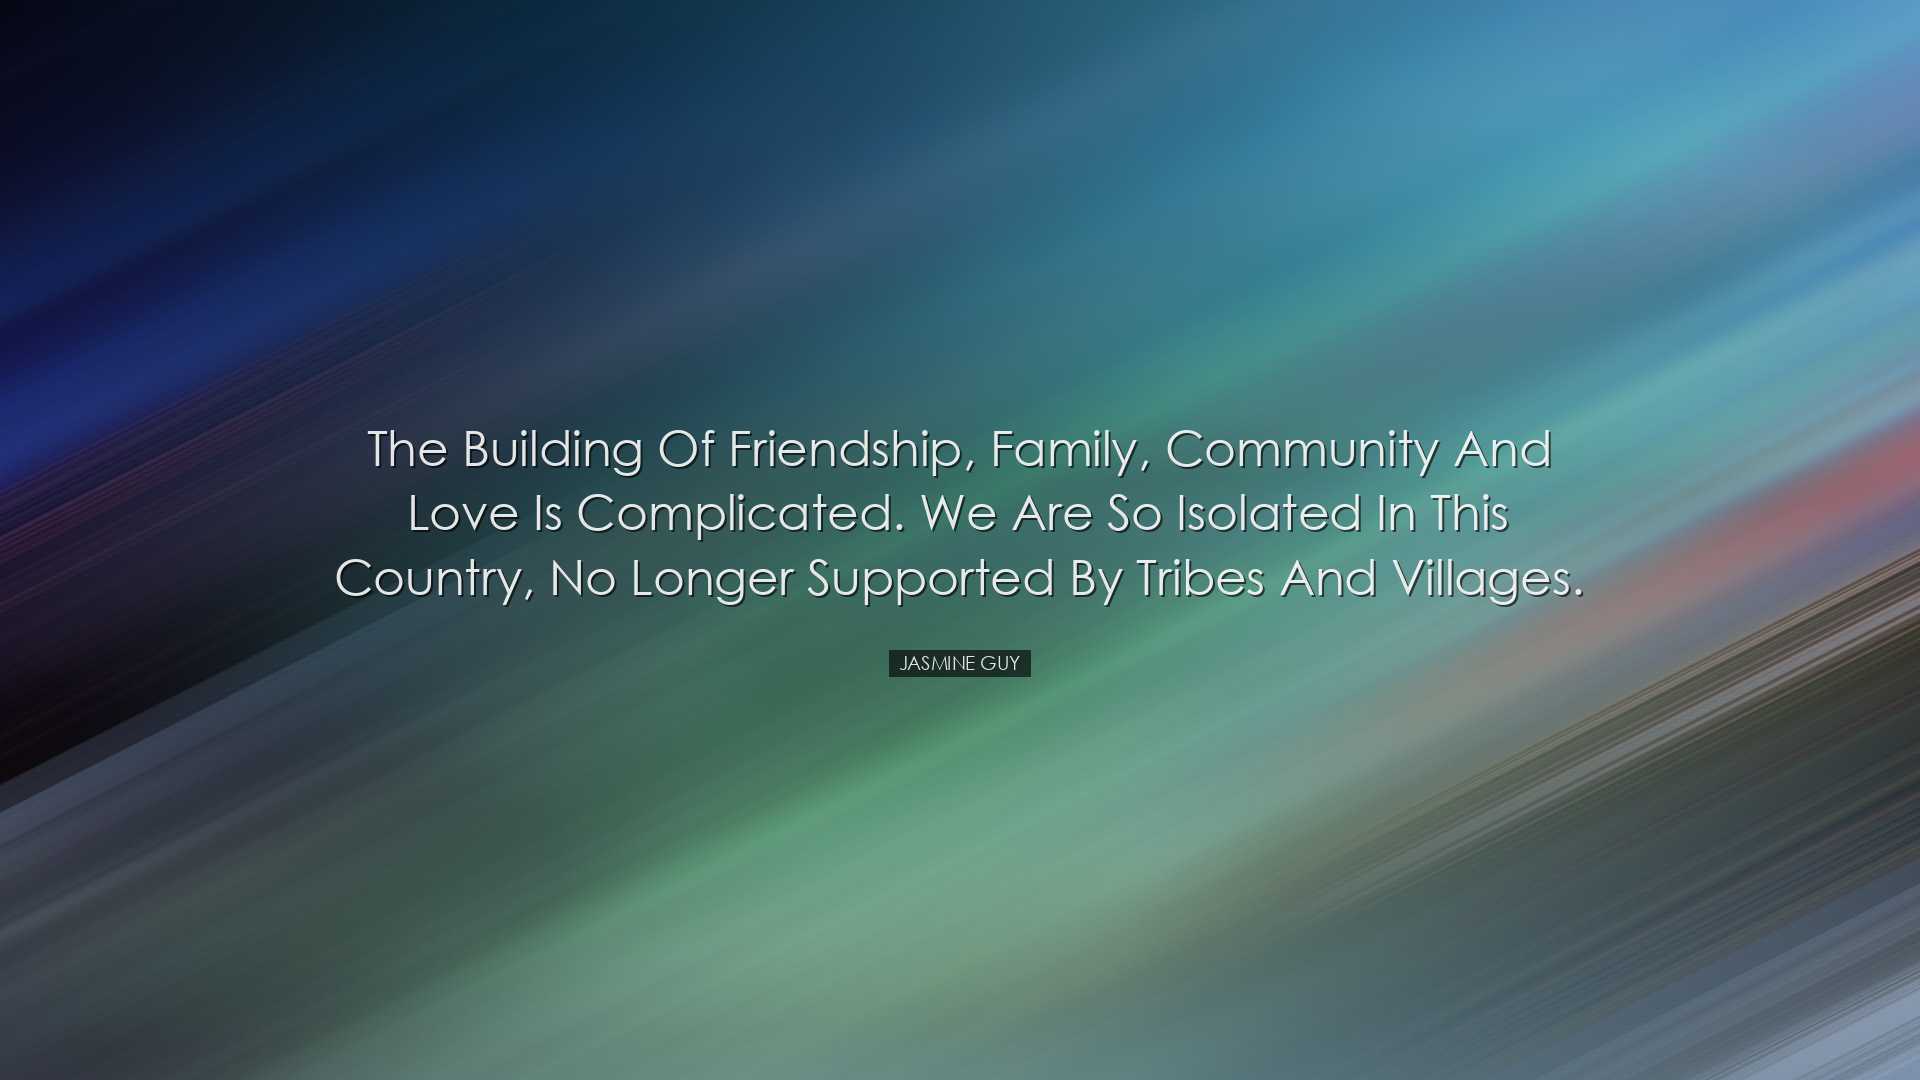 The building of friendship, family, community and love is complica